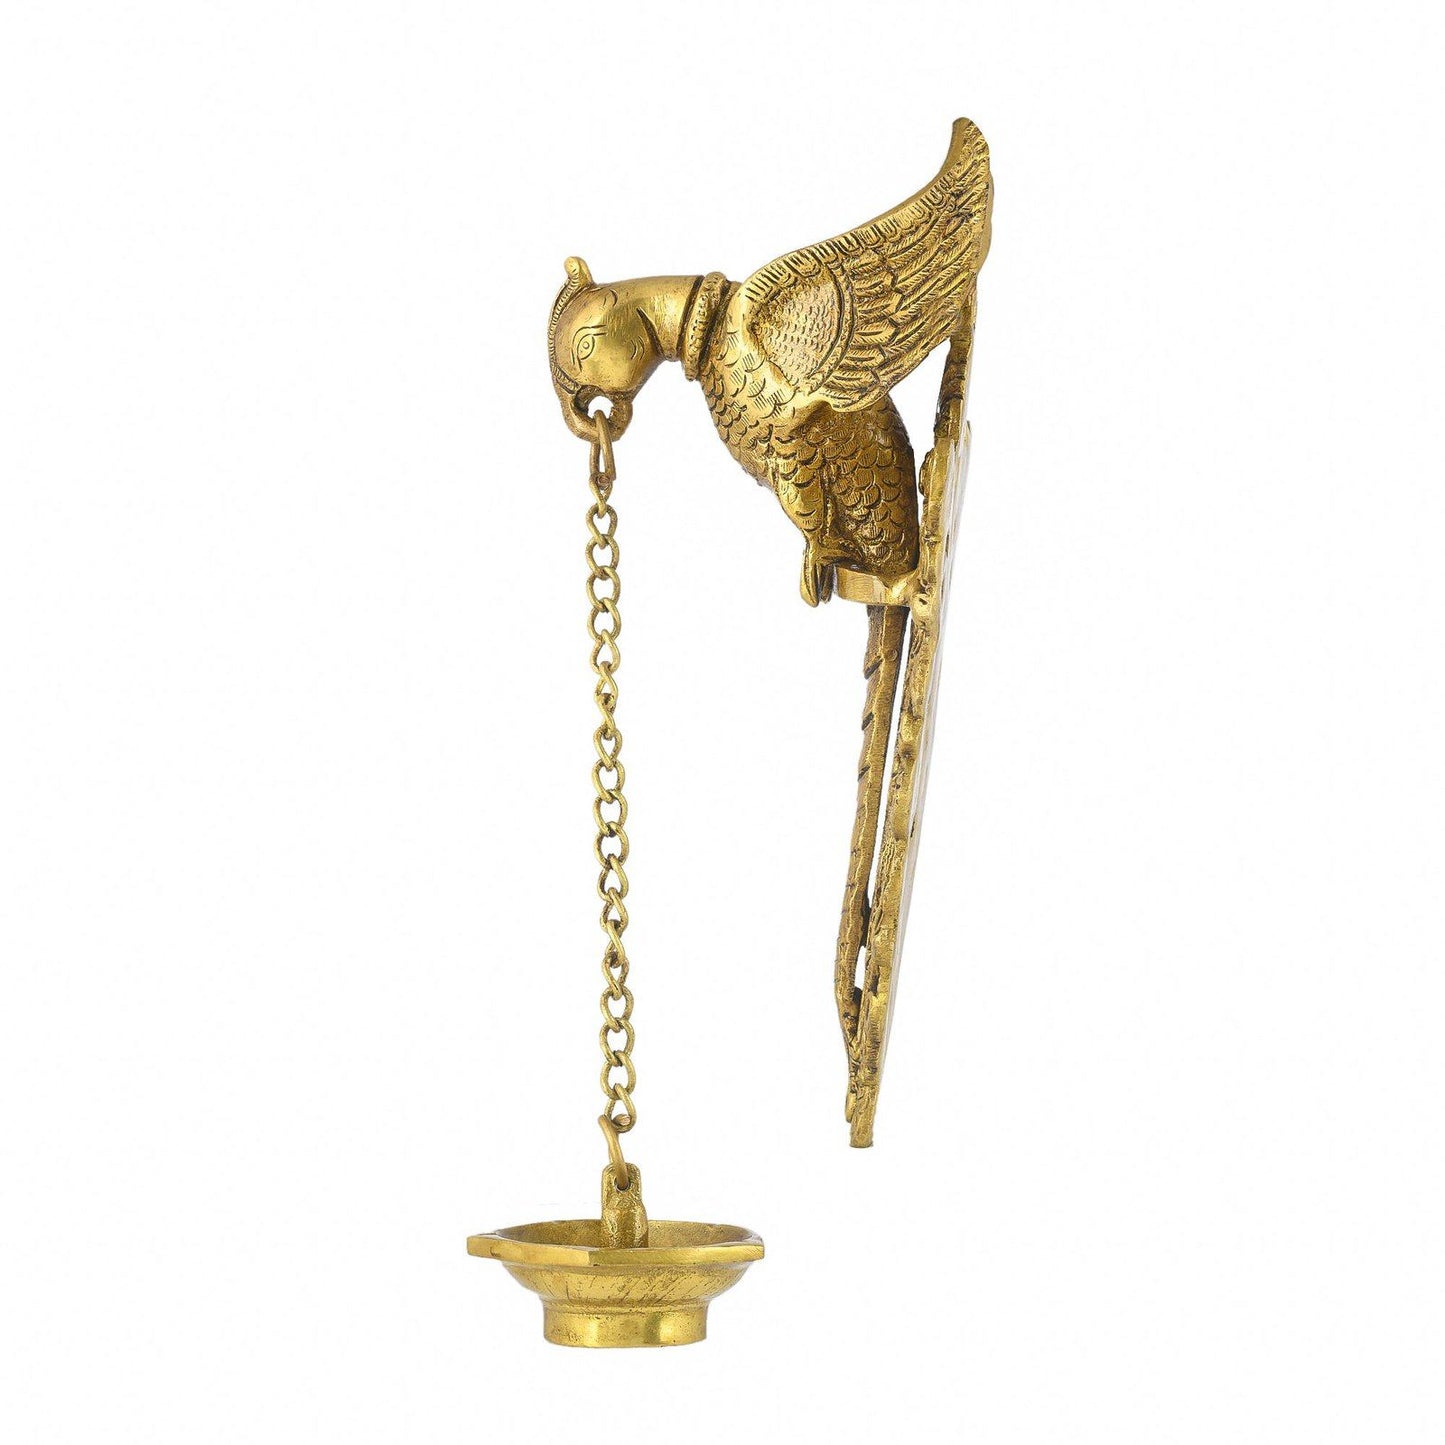 Buy Hanging Diya For Pooja Room, Antique Hanging Wall Mounted oil Lamp With Vintage Brass Bird Wall Art